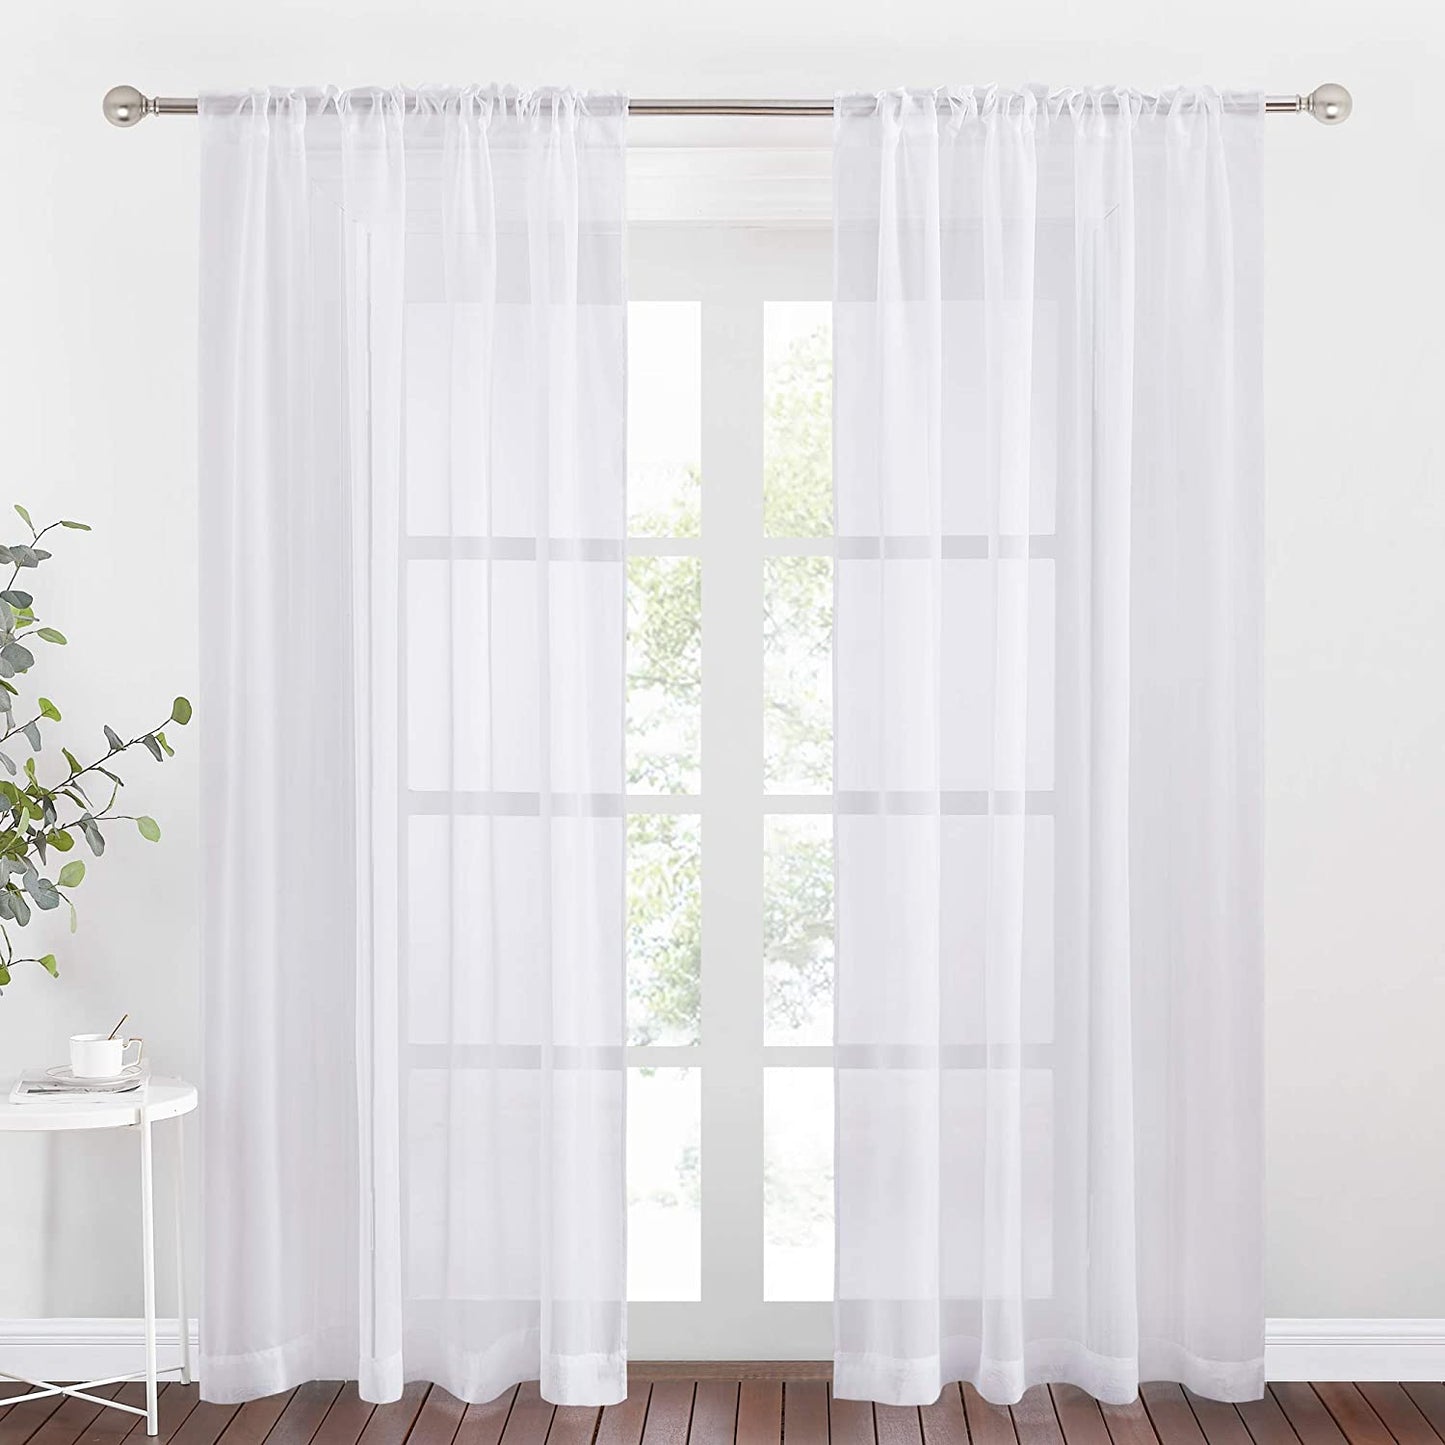 NICETOWN White Semi Sheer Curtains for Living Room- Linen Texture Light Airy Drapes, Rod Pocket & Back Tab Design Voile Panels for Large Window, Set of 2, 55 X 108 Inch  NICETOWN White W54 X L95 